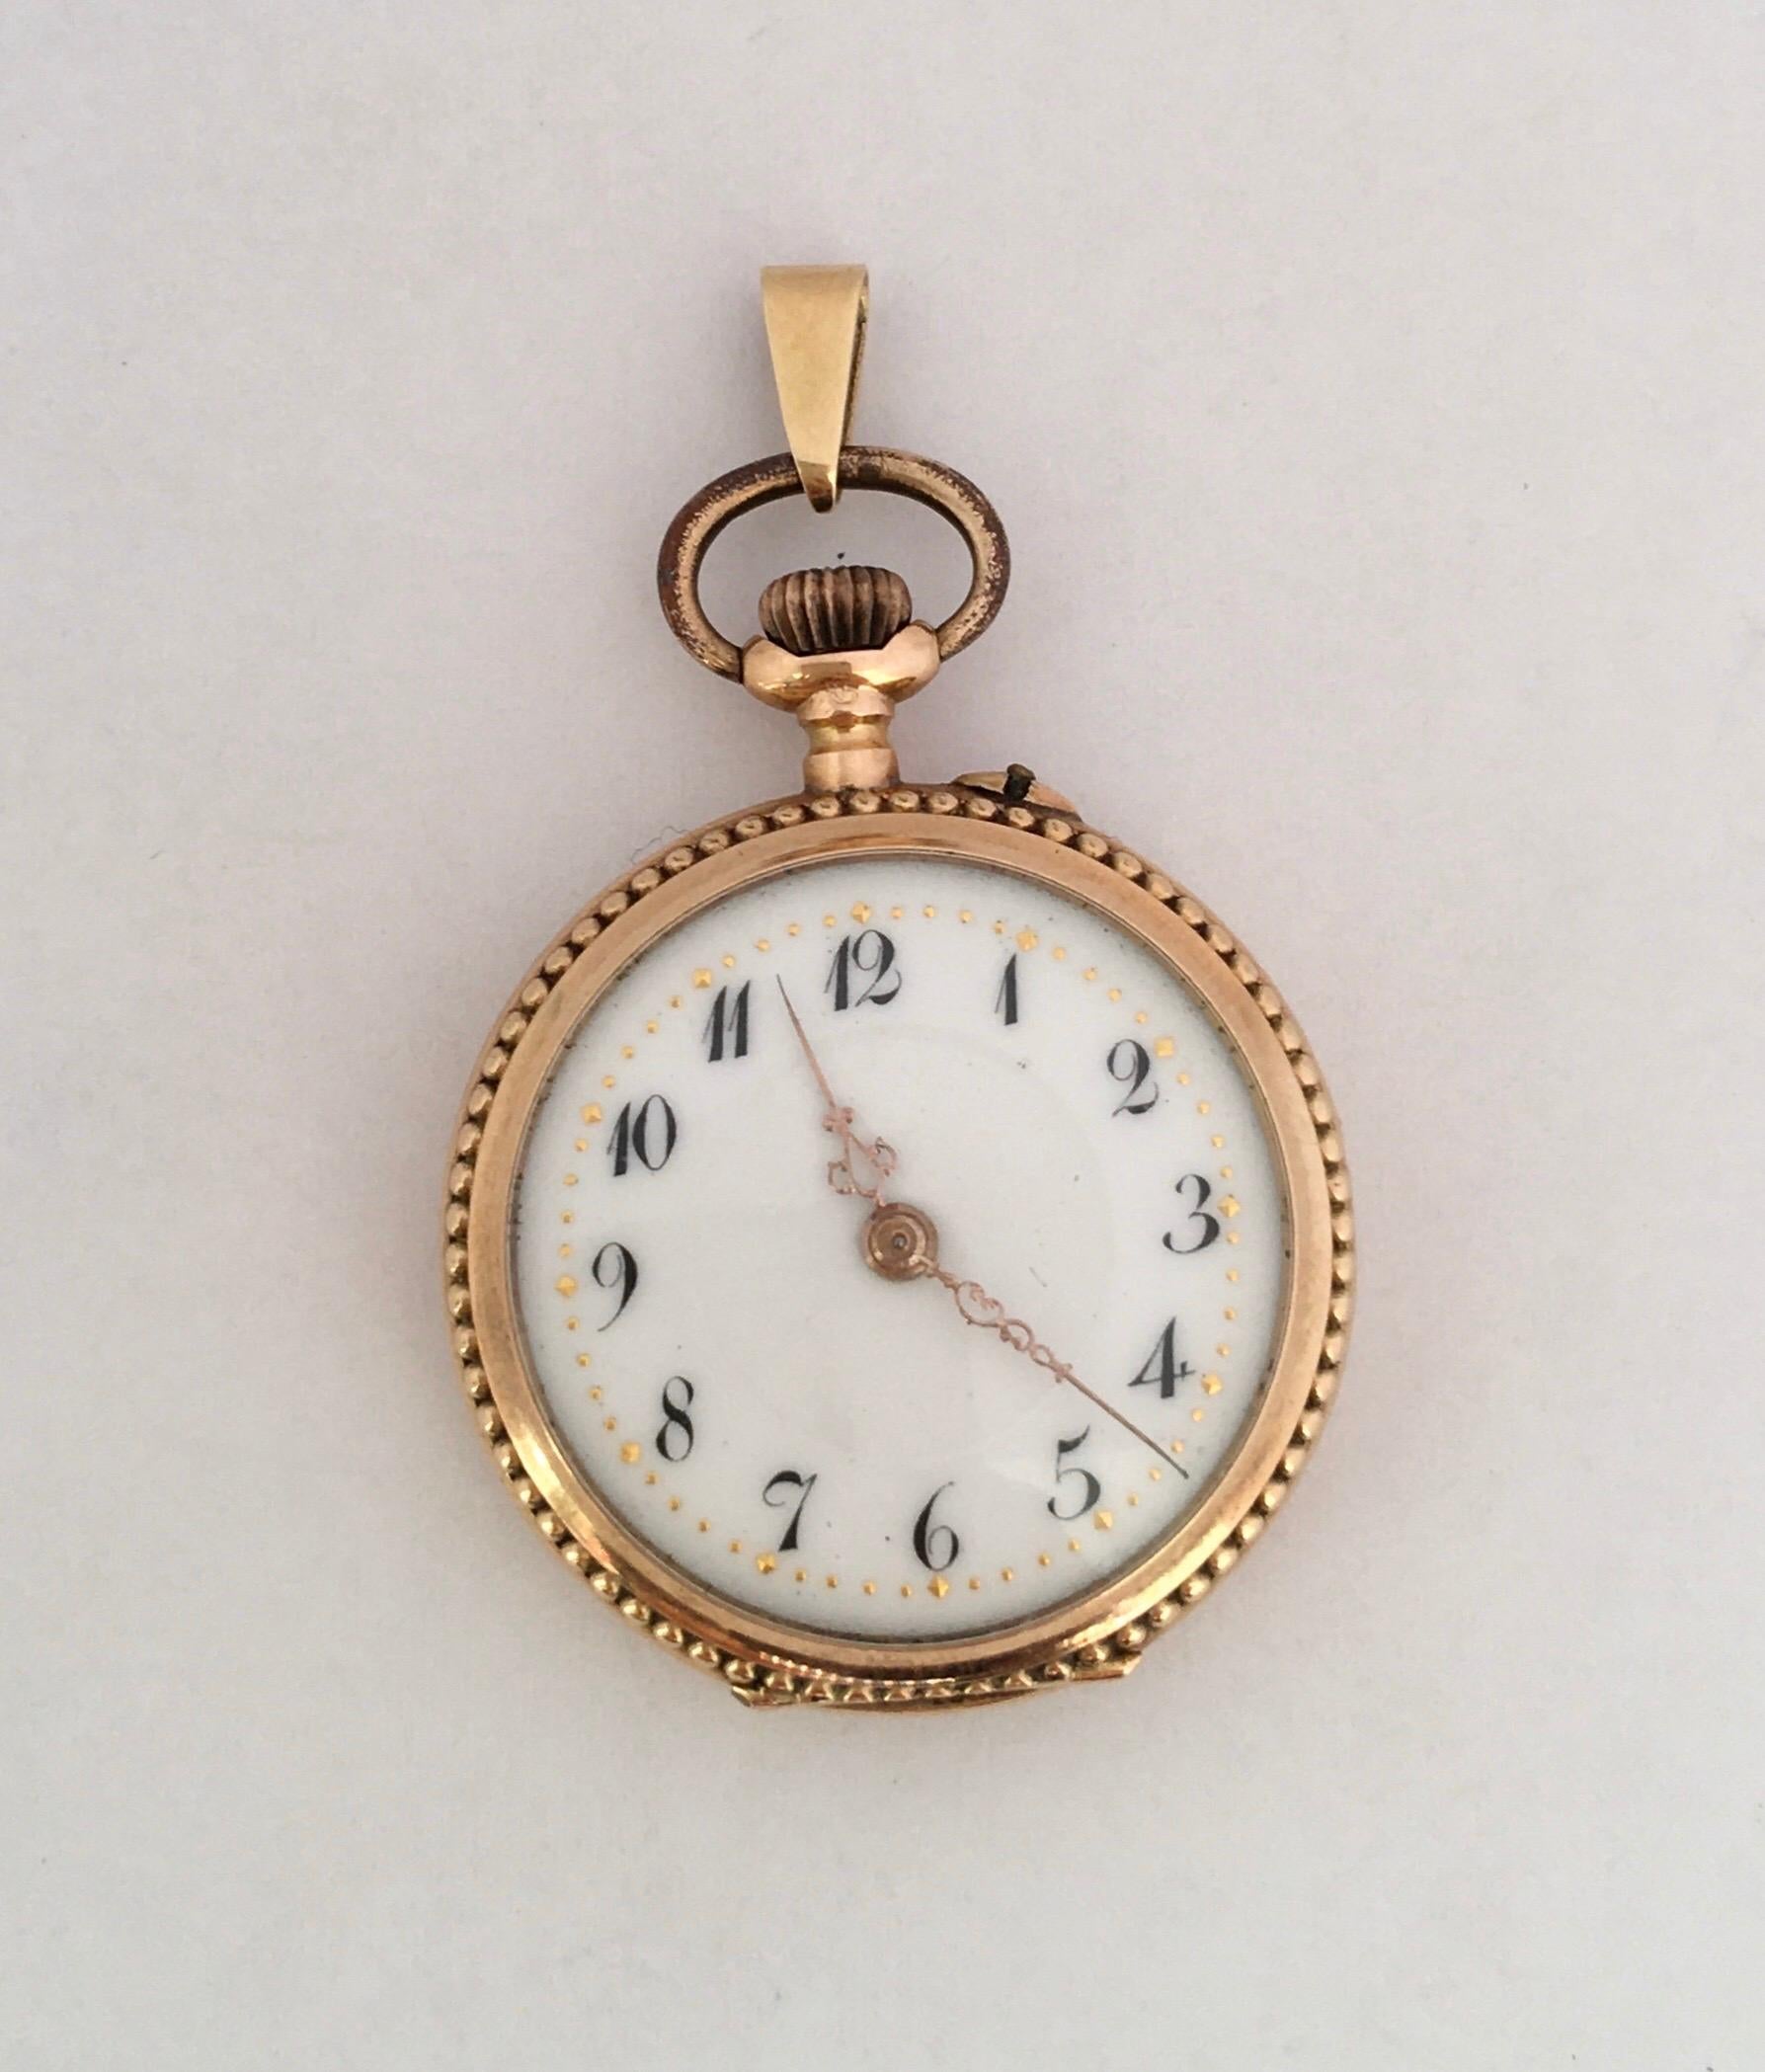 This stunning little gold antique pocket / pendant watch is in good working condition and it is recently been serviced and it runs well. This watch weighed 17.1 grams and measured 29mm case diameter excluding the crown.

Please study the images